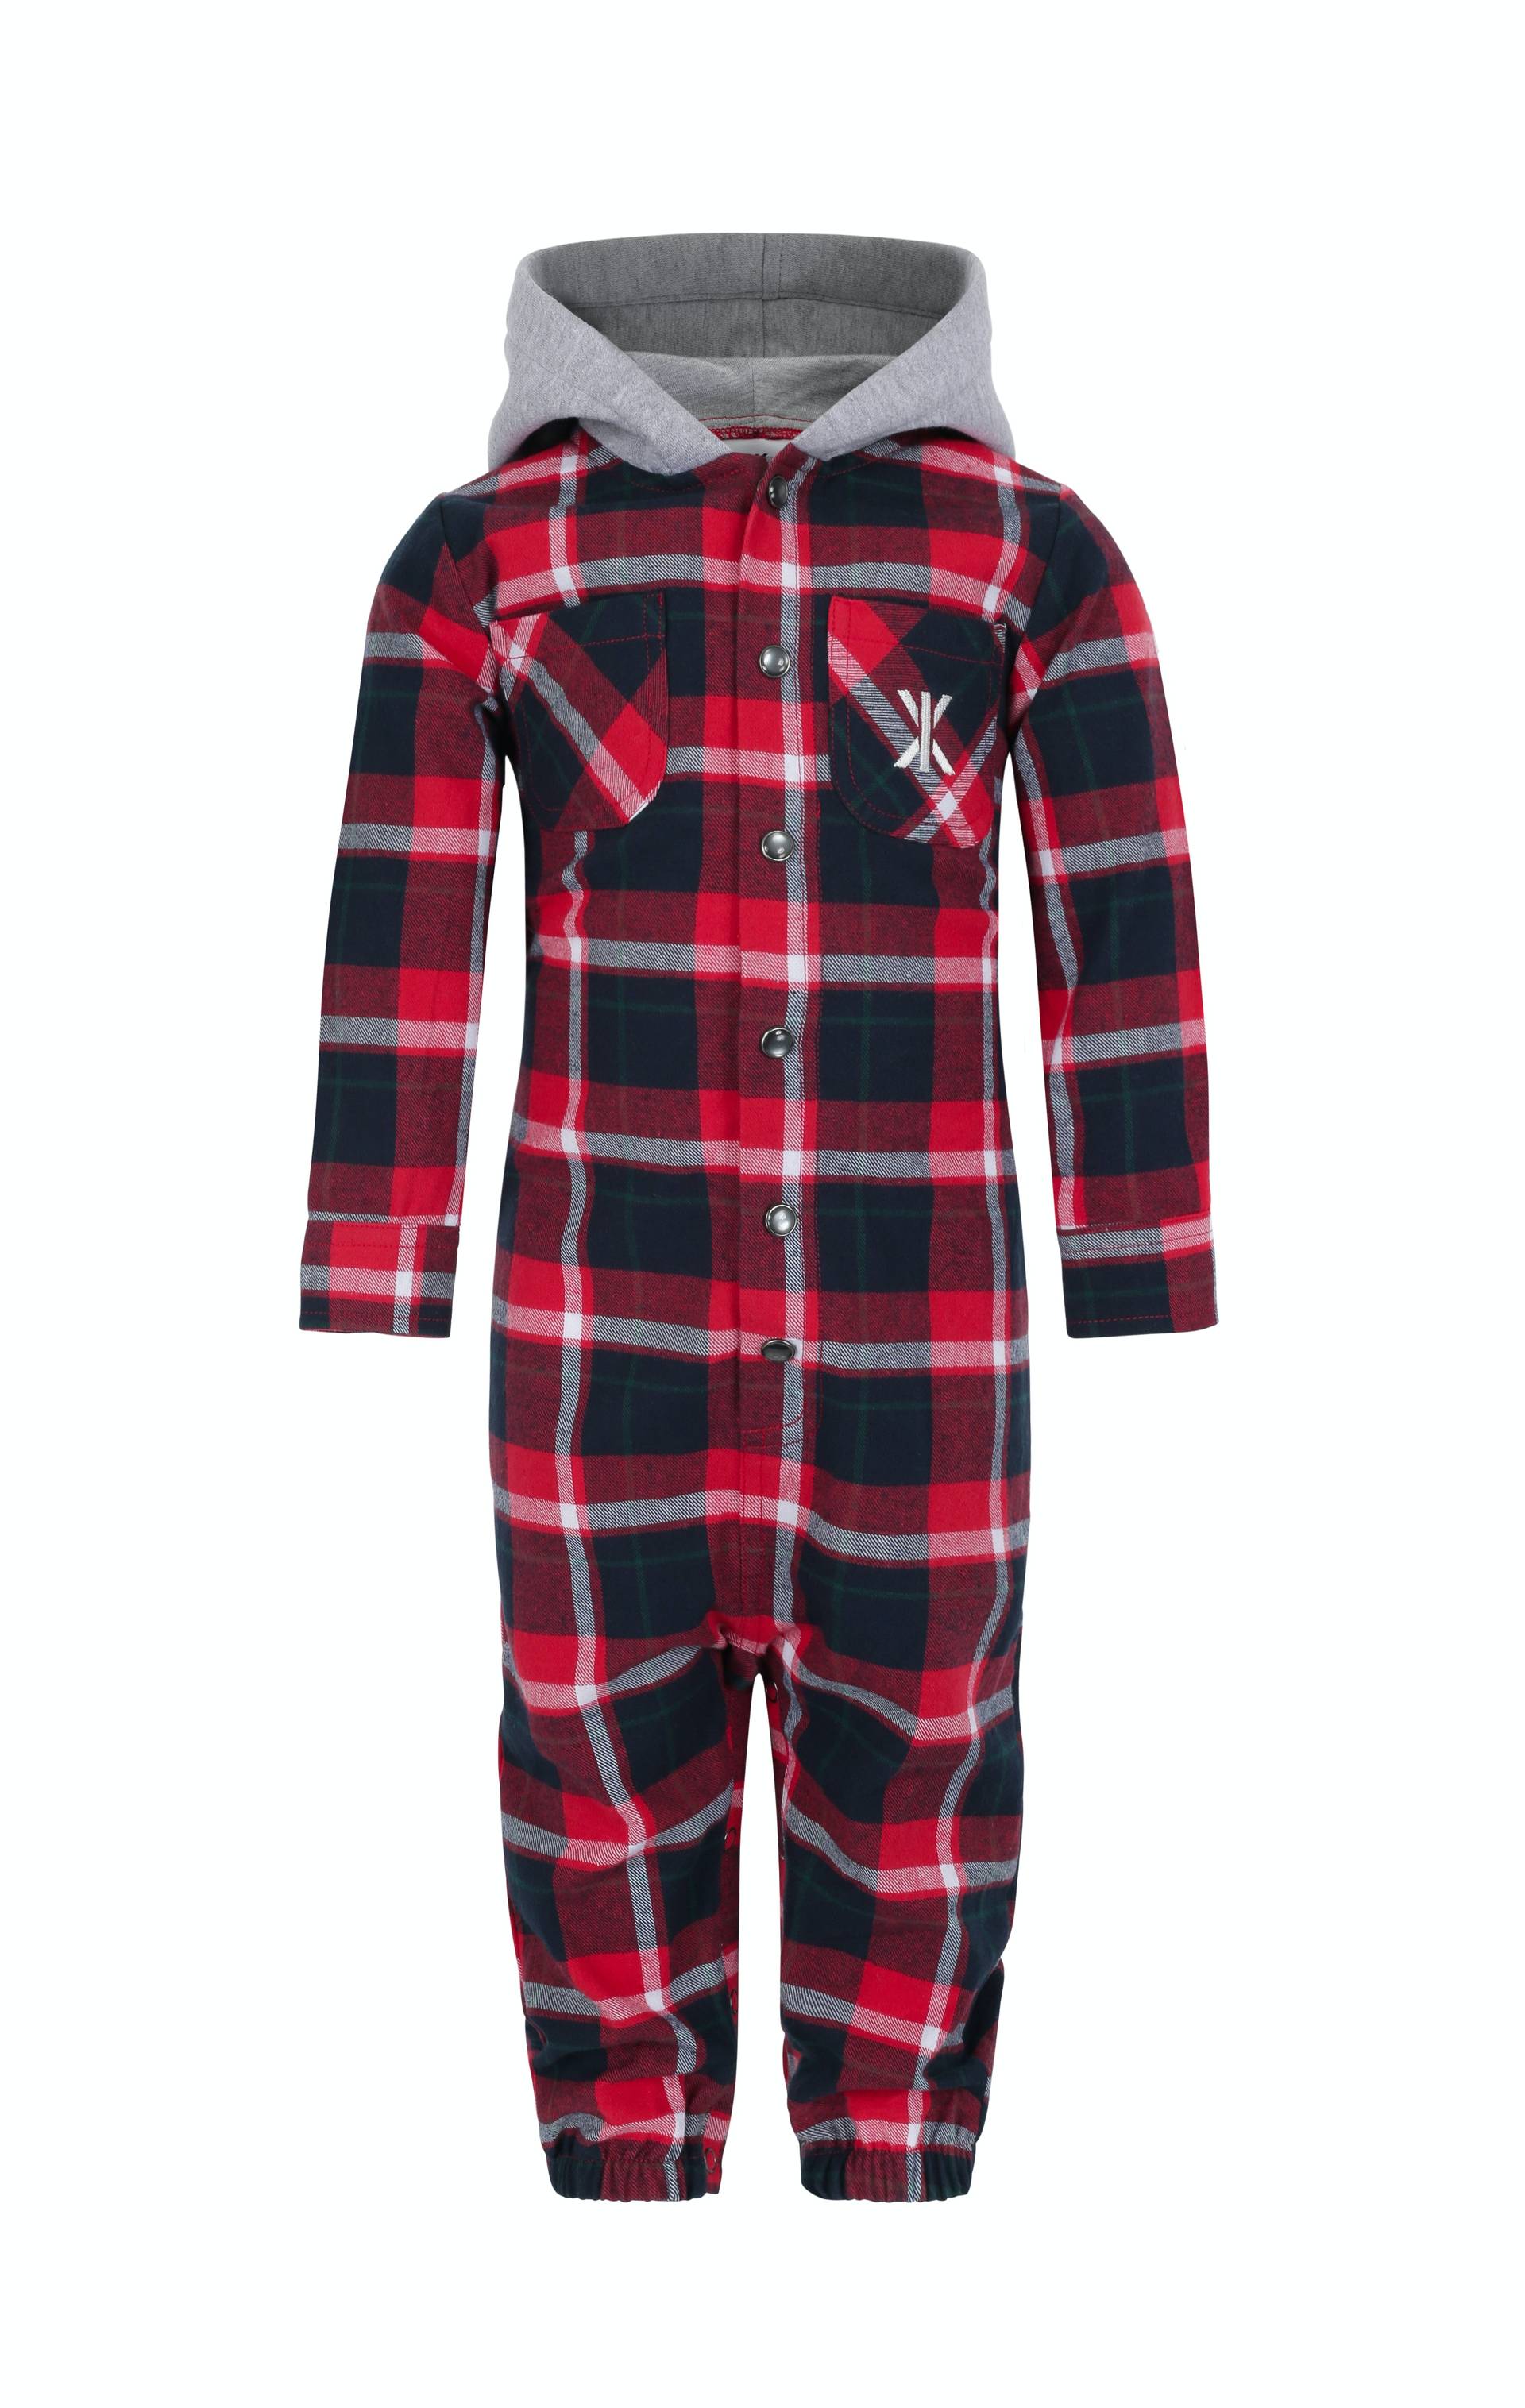 Onepiece Check Baby Jumpsuit Black / Red - 1